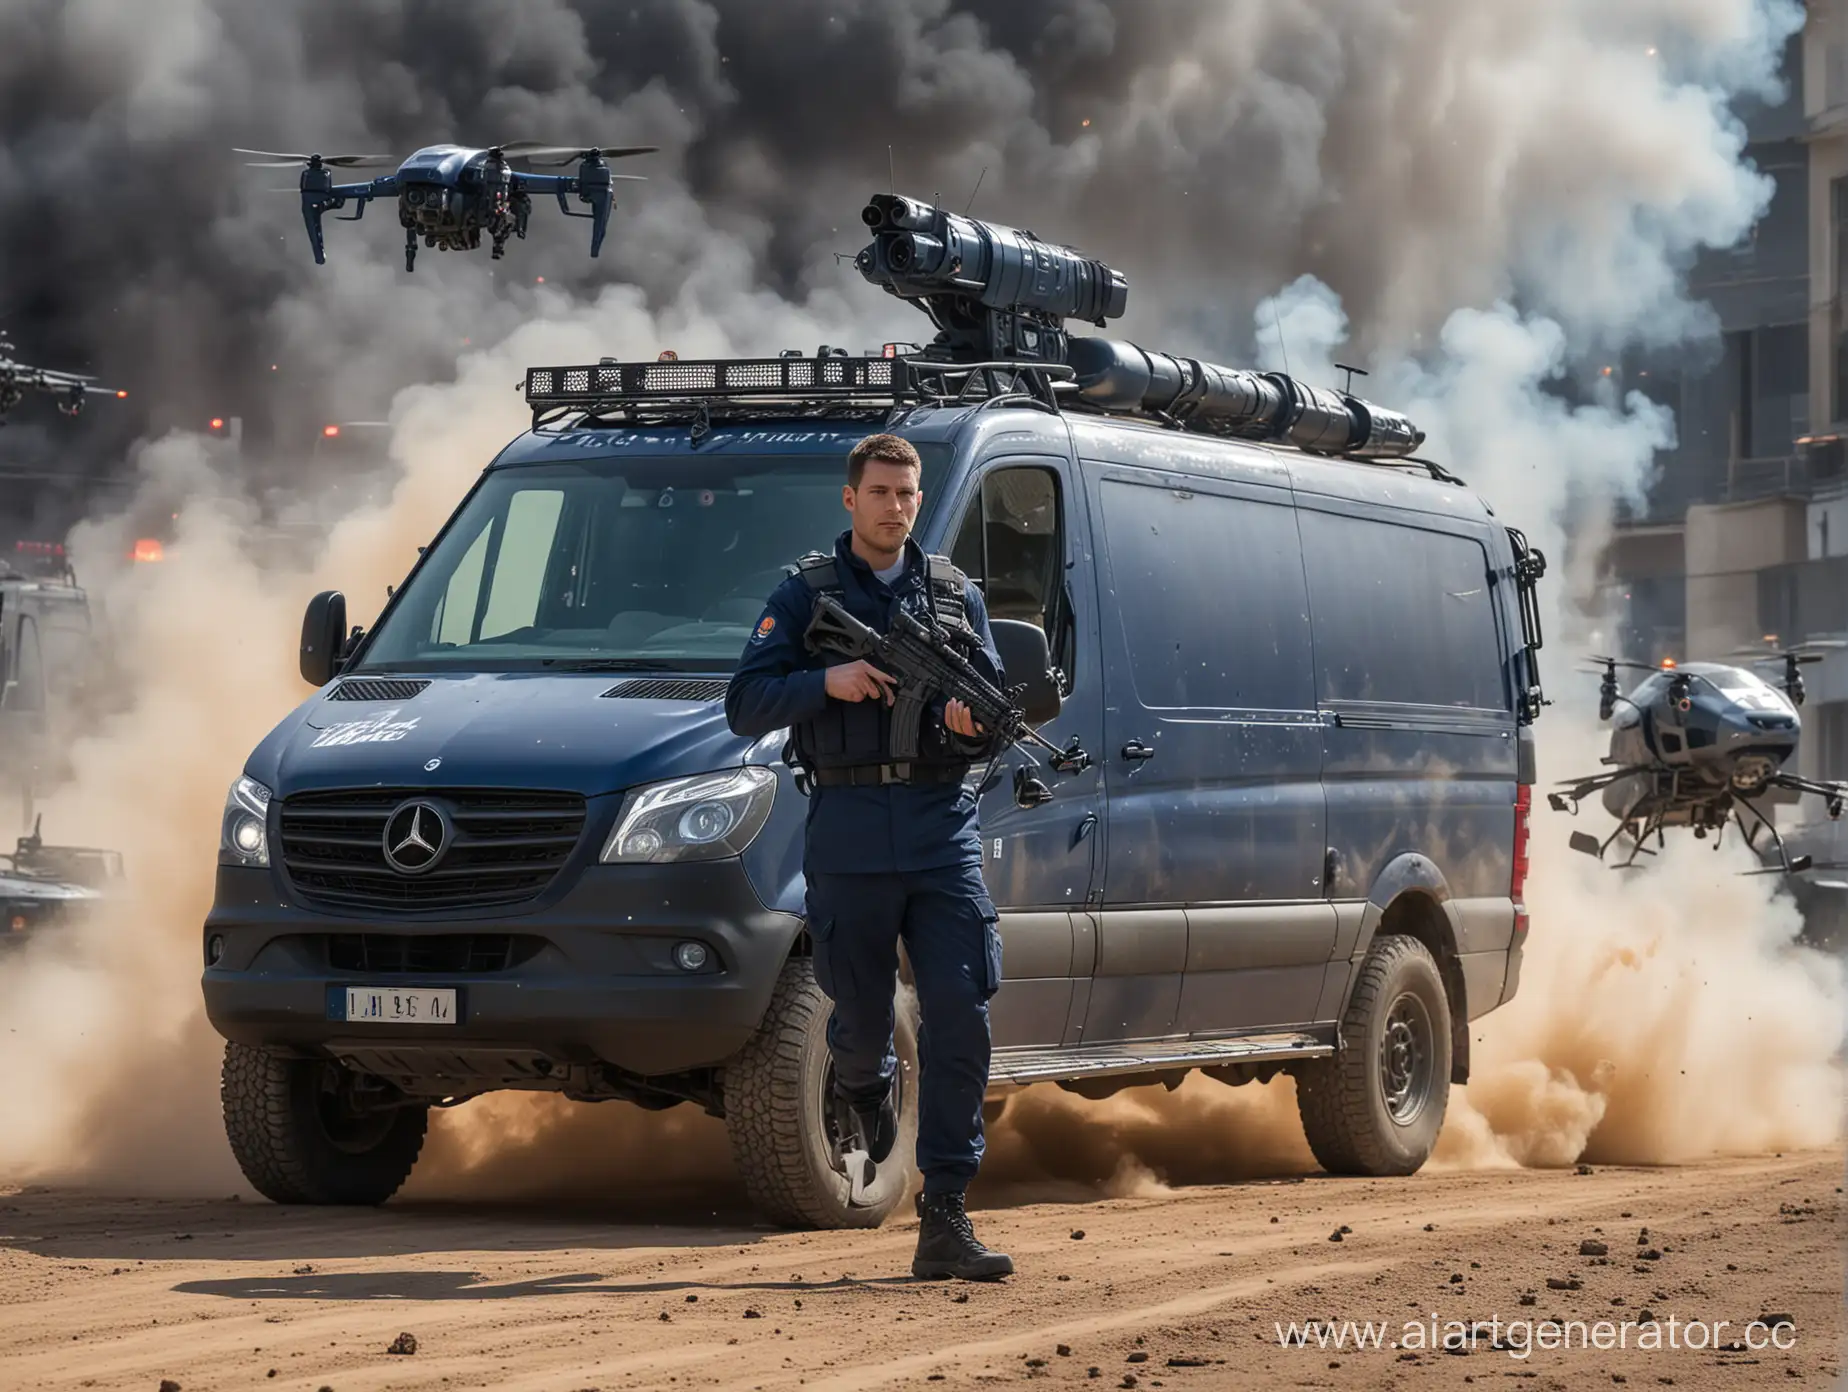 a man in a military uniform holding a blaster, behind the man car mersedes sprinter dark blue color, the car has antennas, in the background flying quadrocopters and explode
